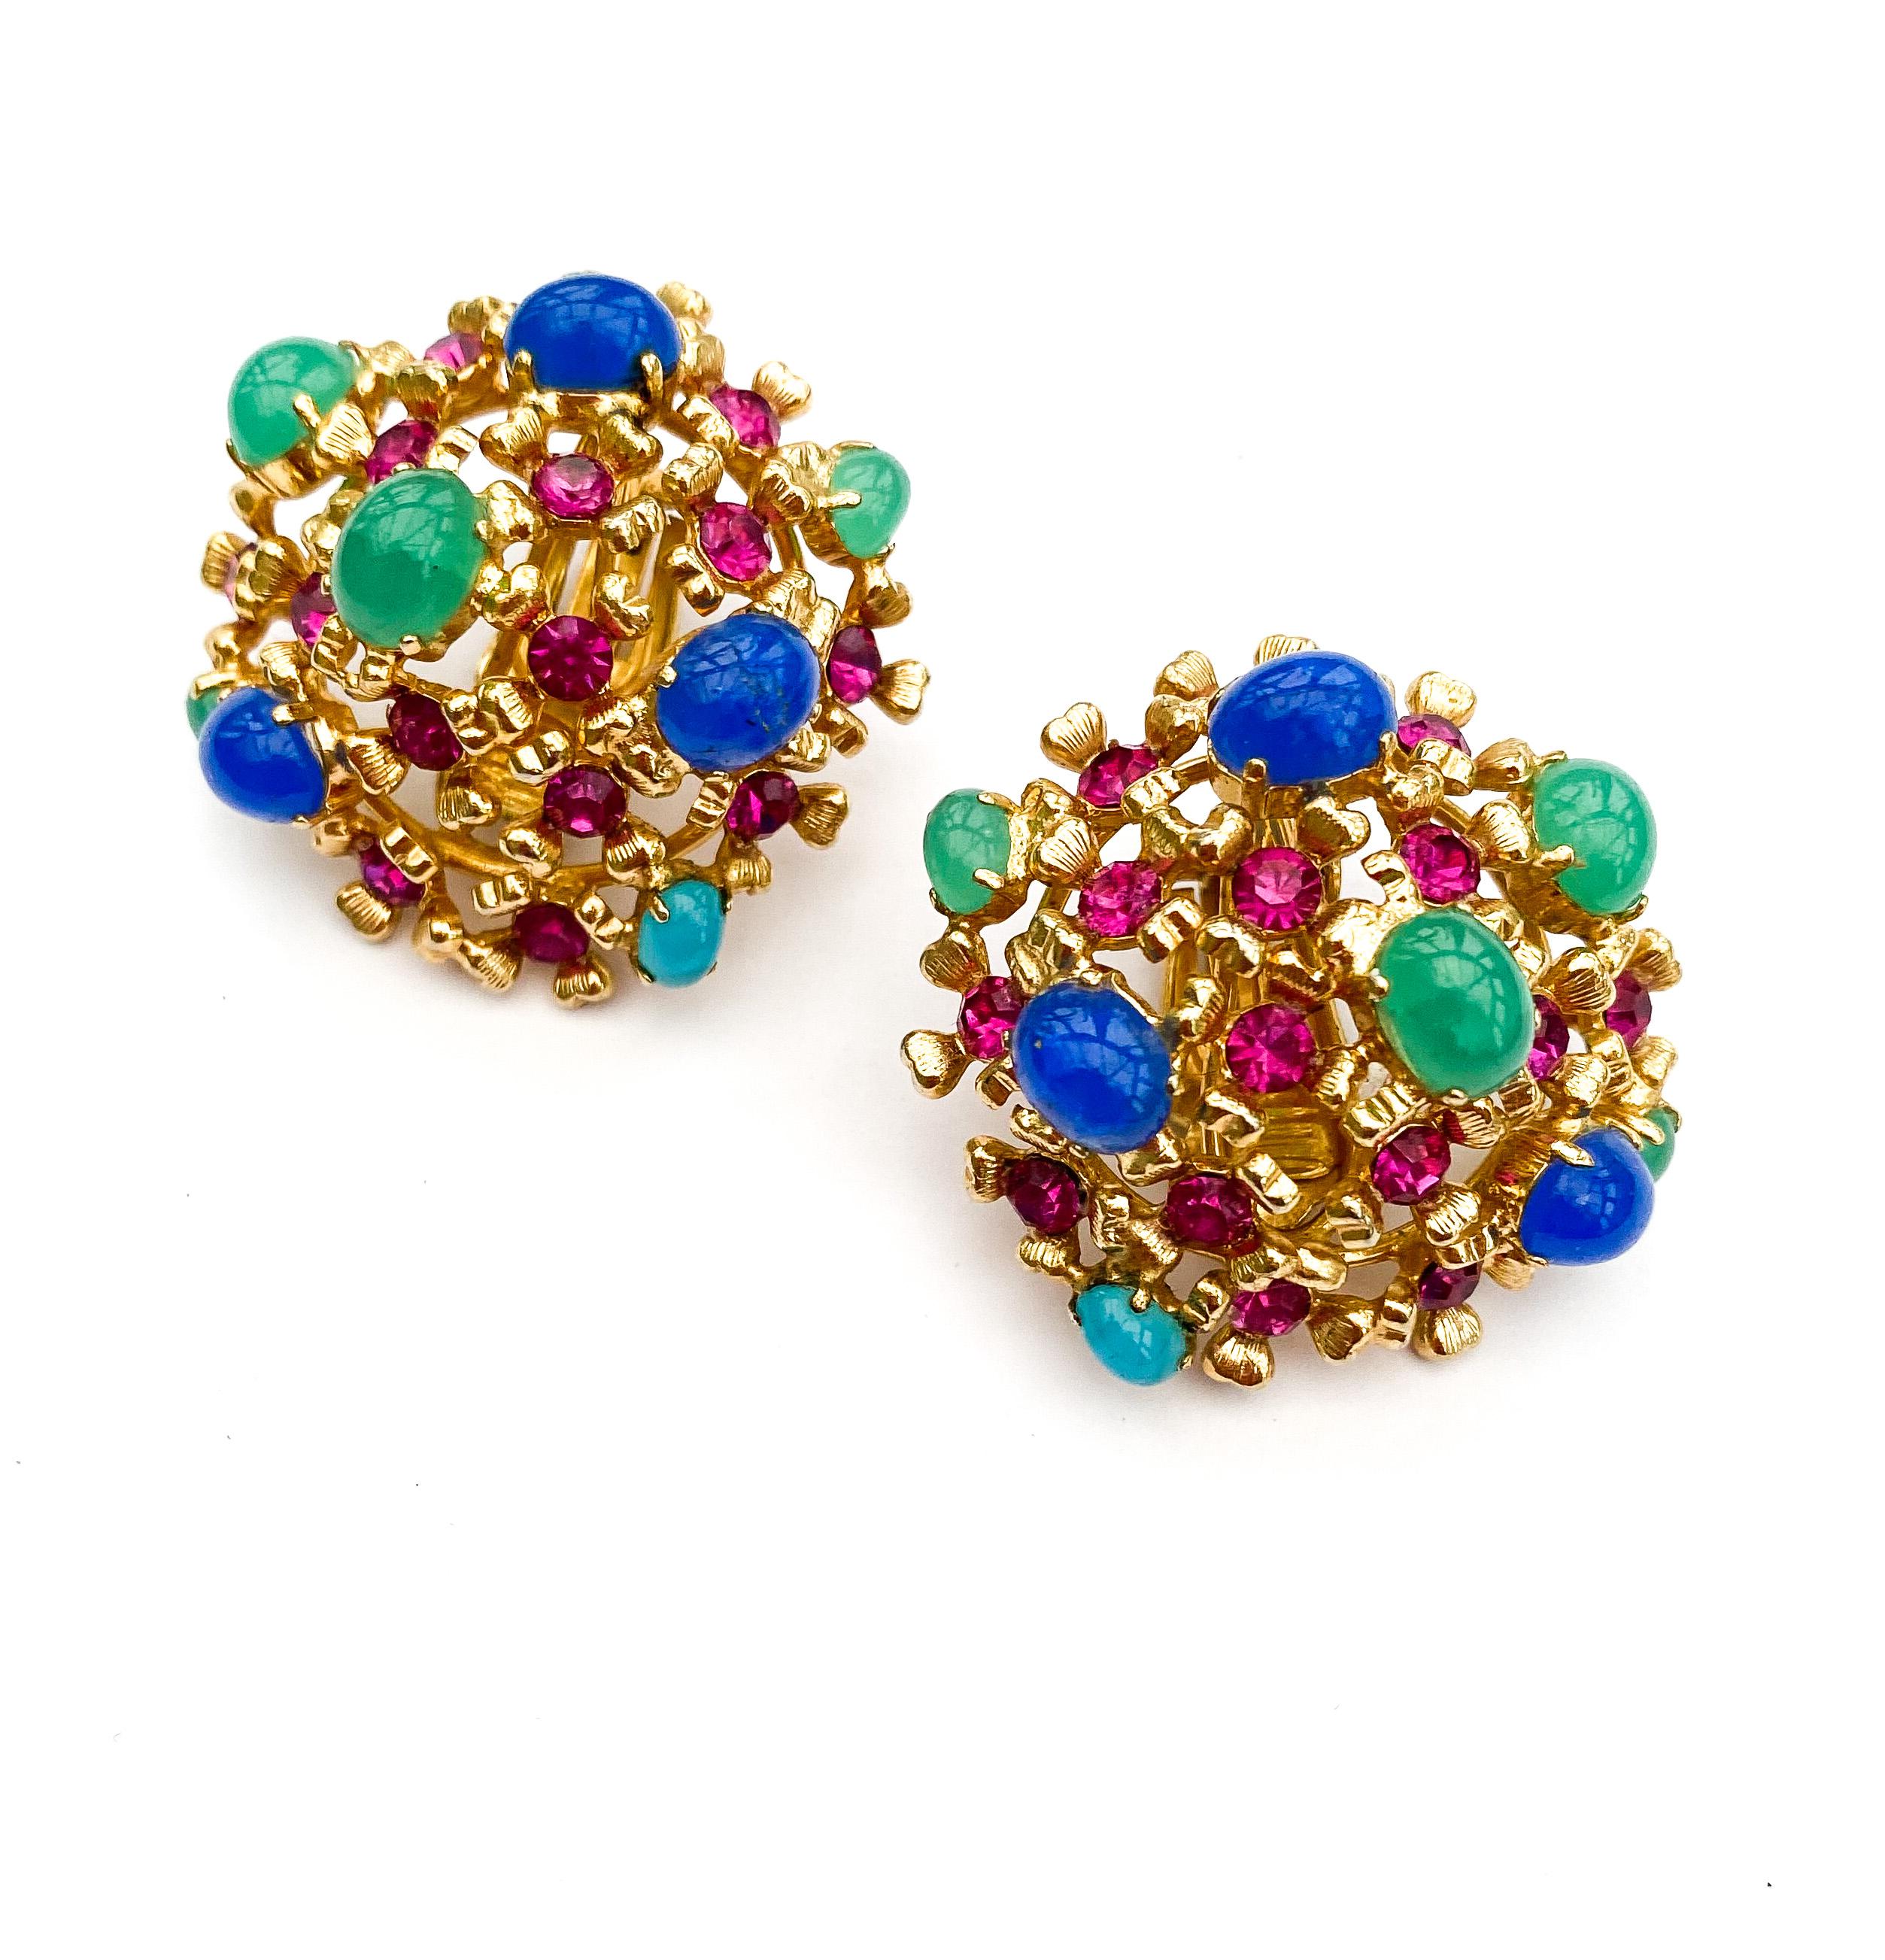 Exquisite and very glamourous 'cluster' domed earrings made by Henkel and Grosse for Christian Dior. Tiny gilt metal florettes or crosses form a domed earring, each studded with a ruby paste at the centre, supporting paste jade and blue chrysoprase